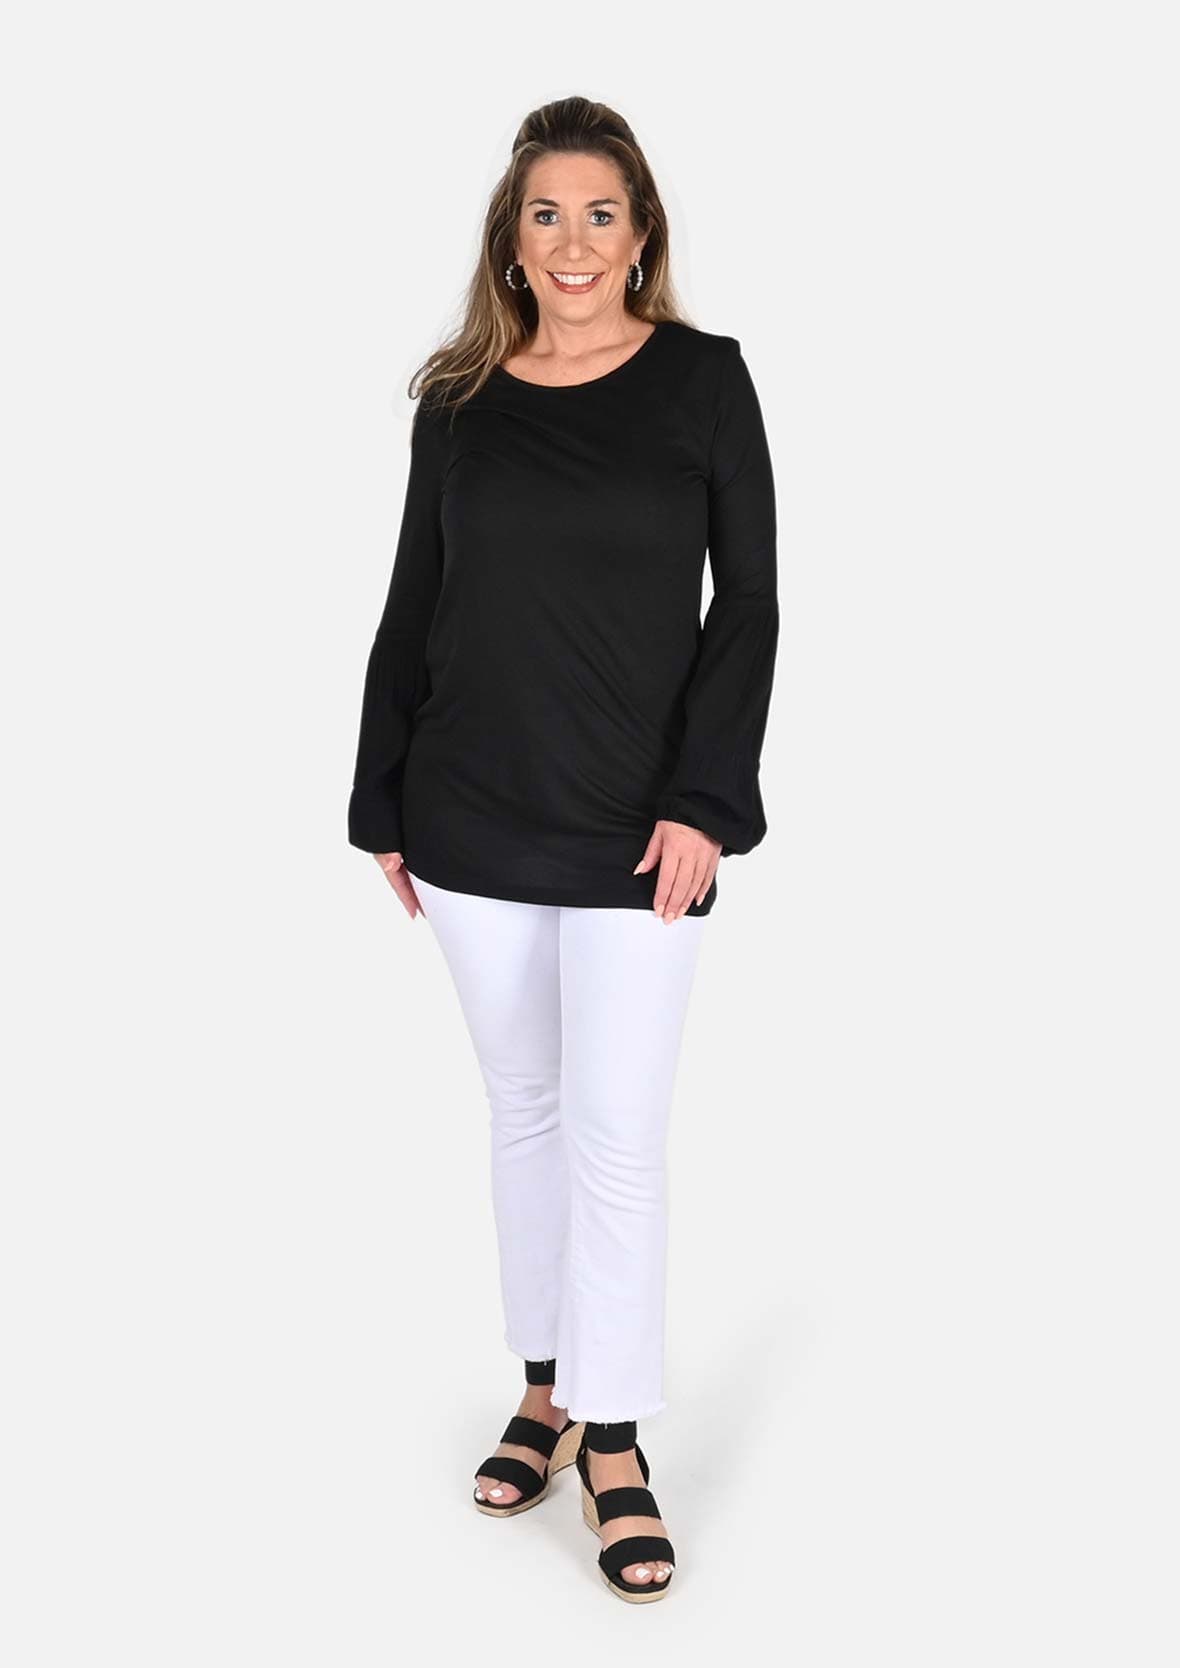 Trimmed Blouson Sleeve Tunic Top